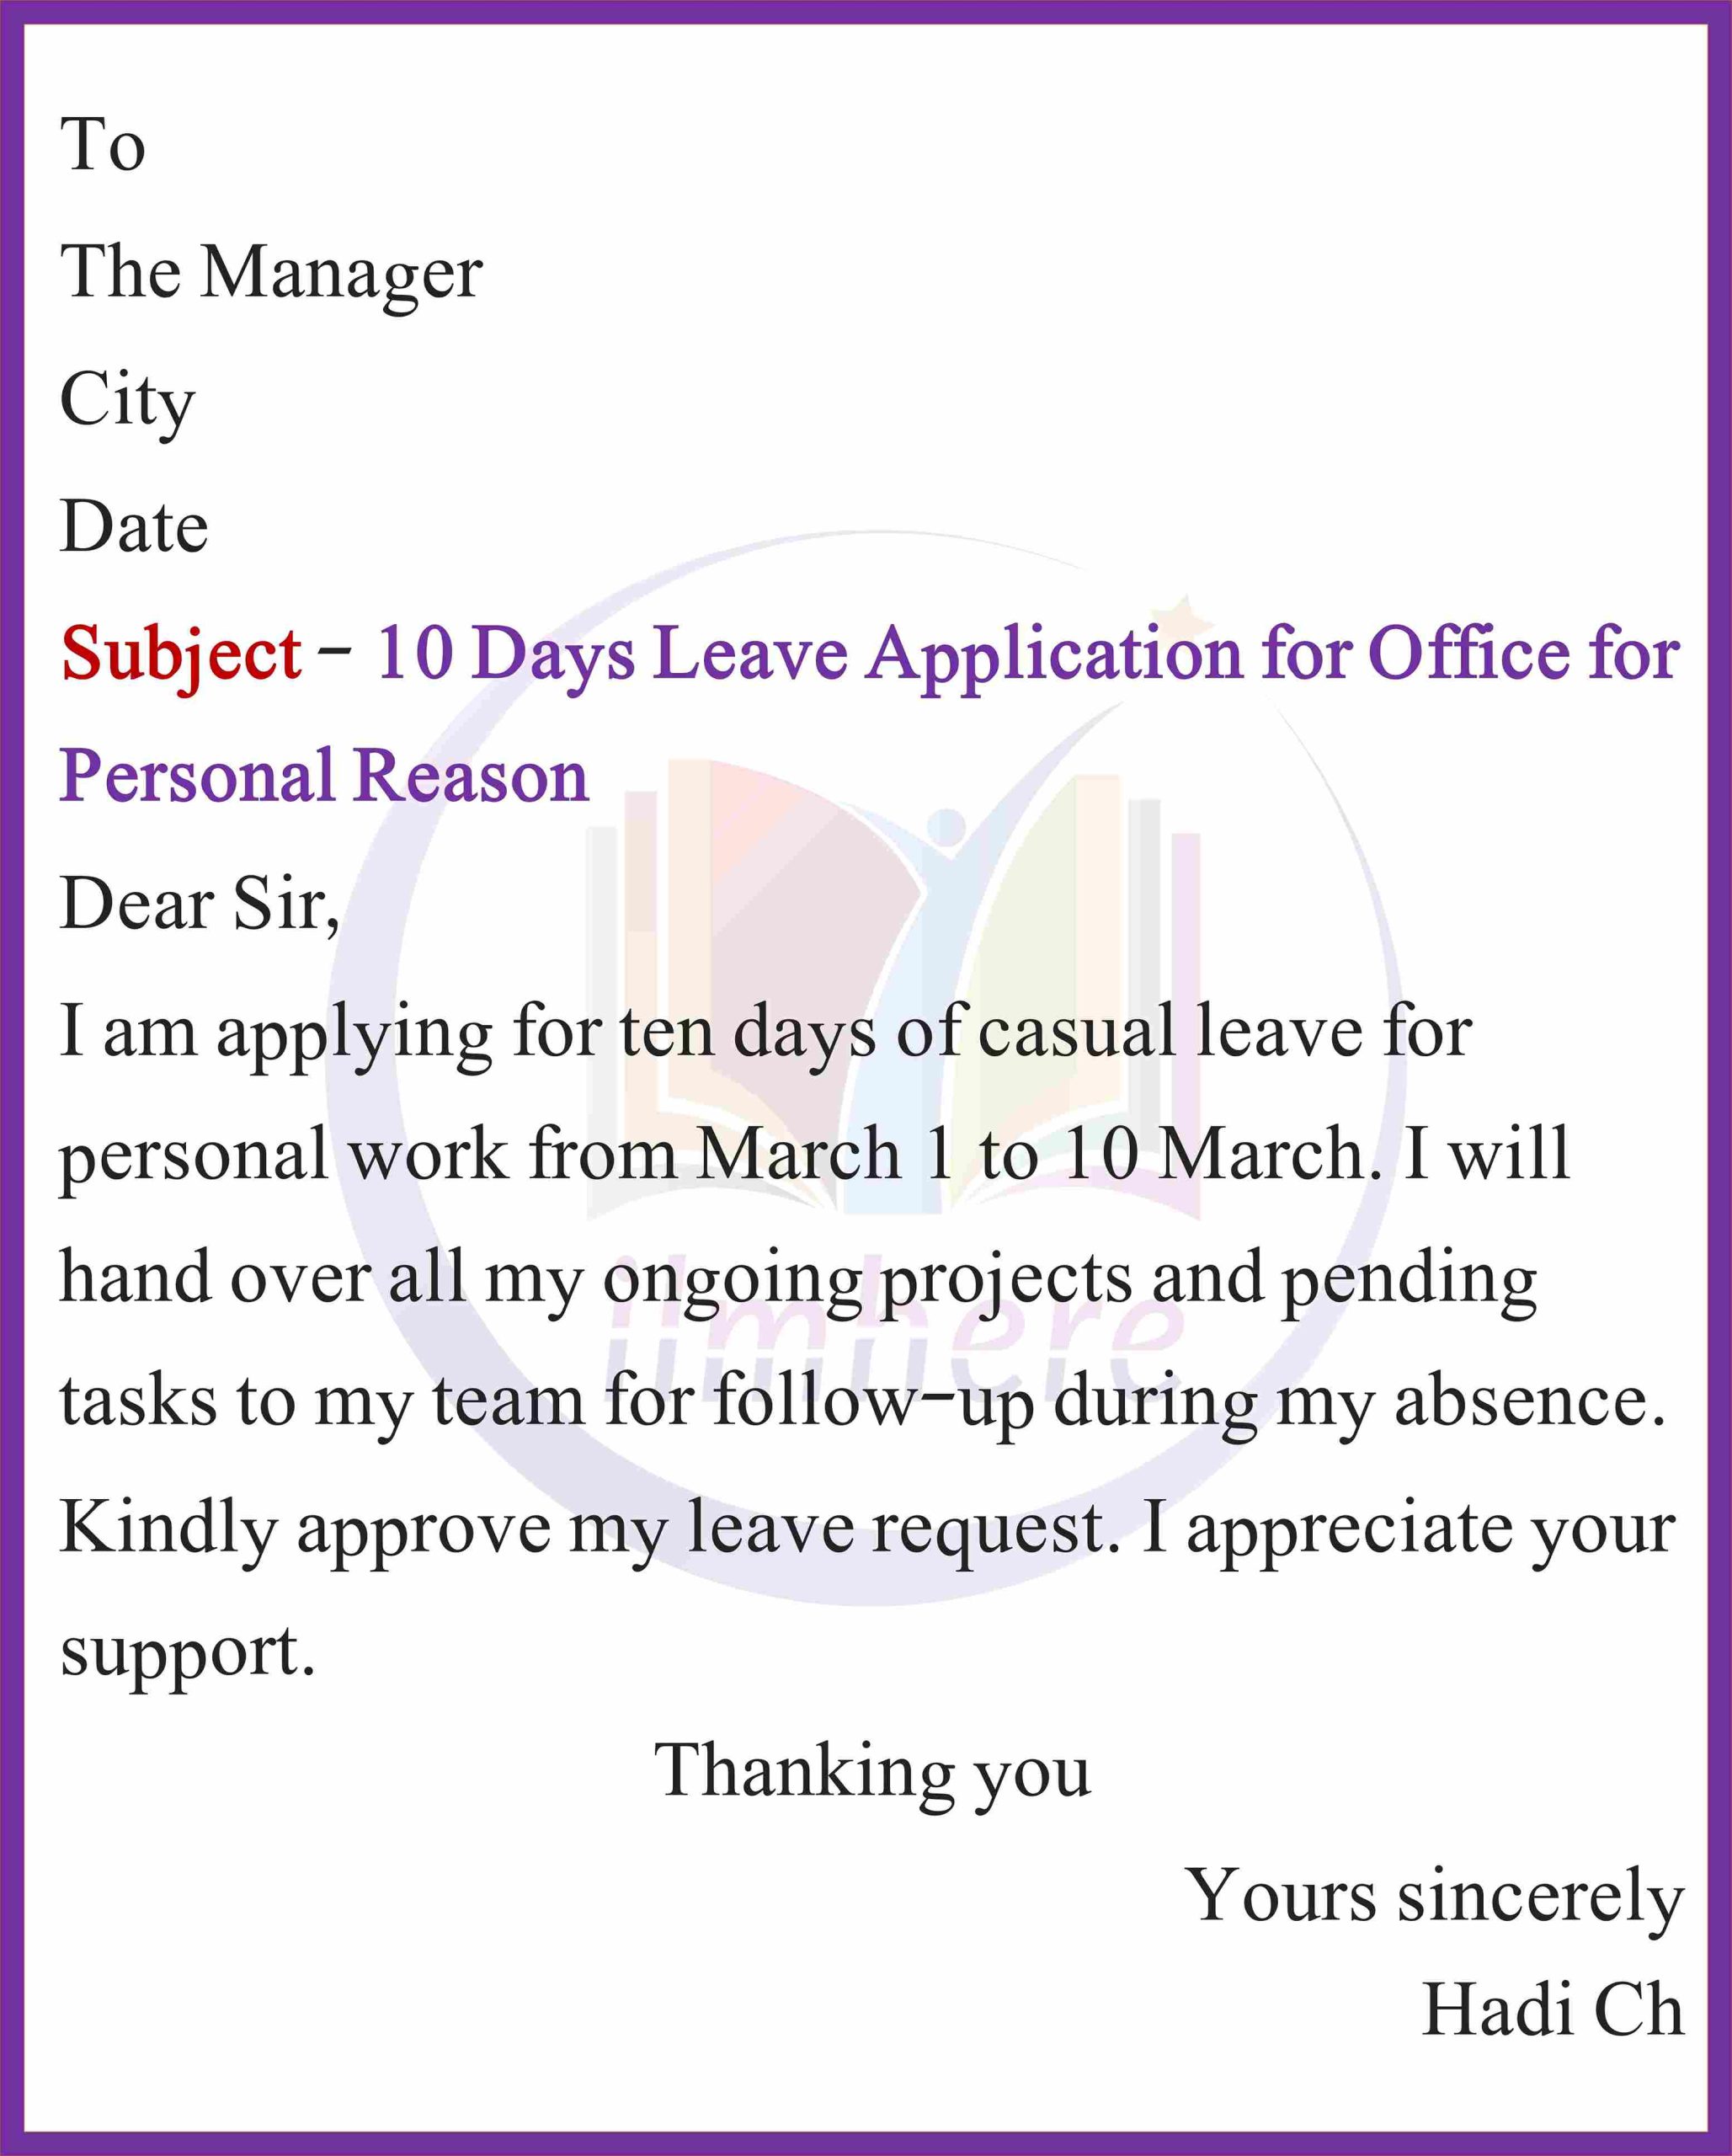 10 Days Leave Application for Office for Personal Reason